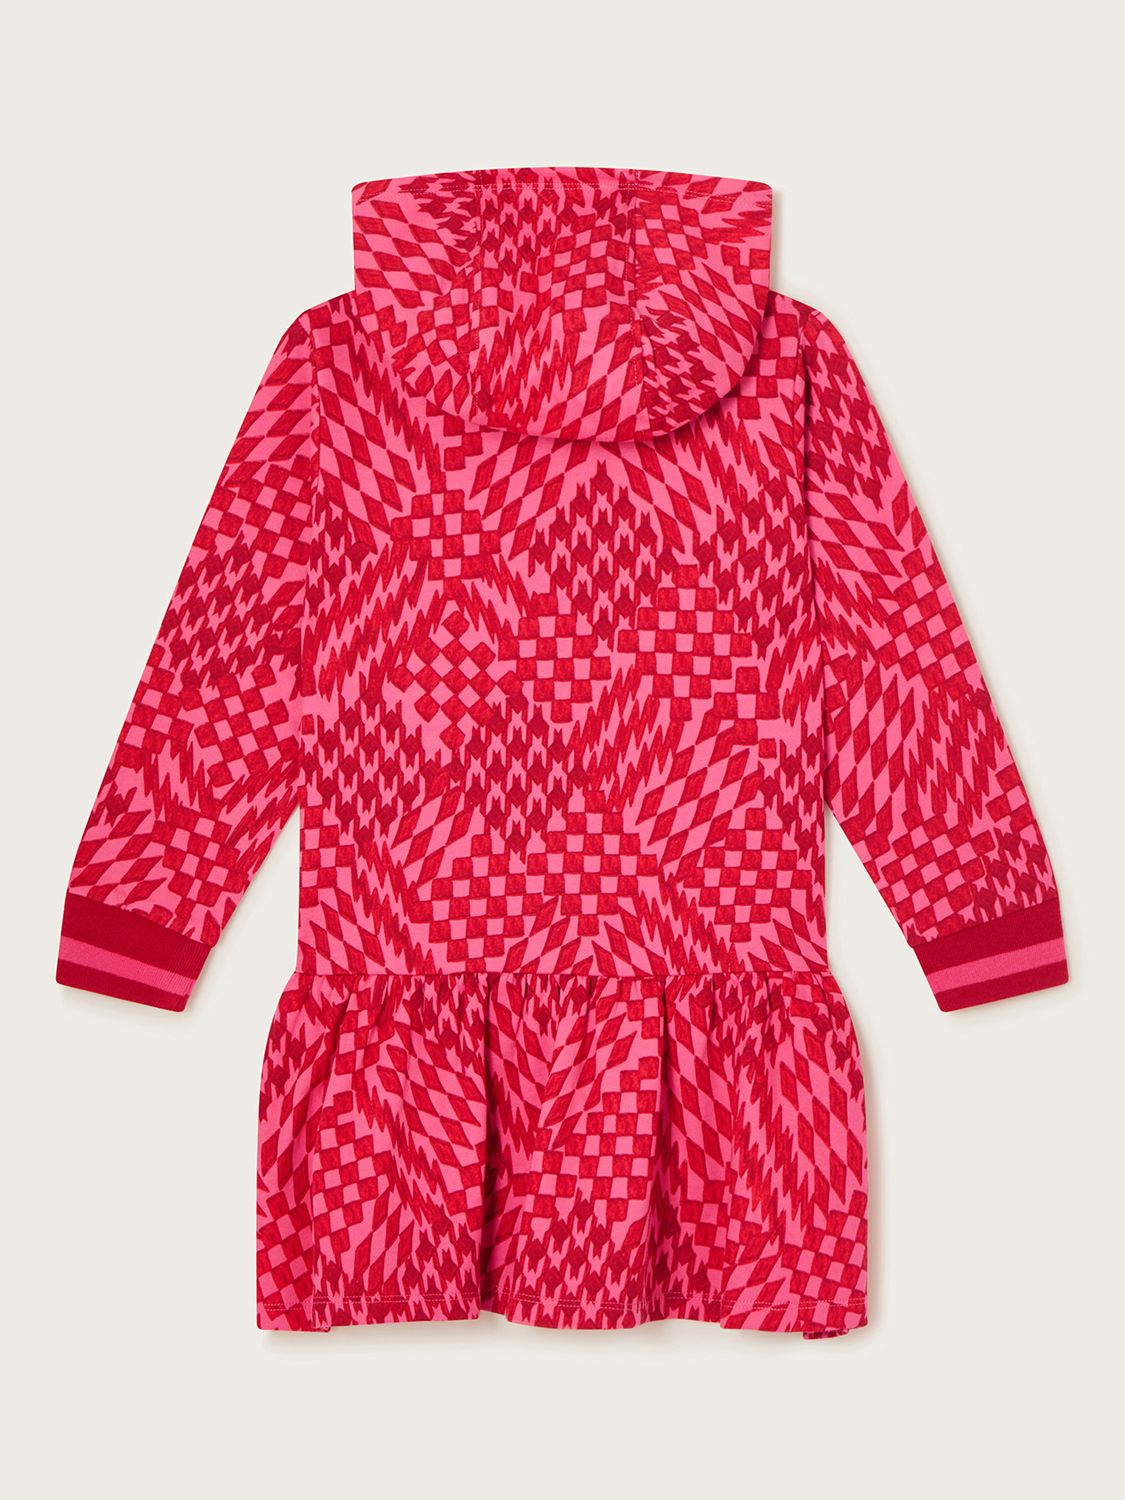 Monsoon Kids' Apple Abstract Print Hooded Skater Dress, Red, 5-6 years